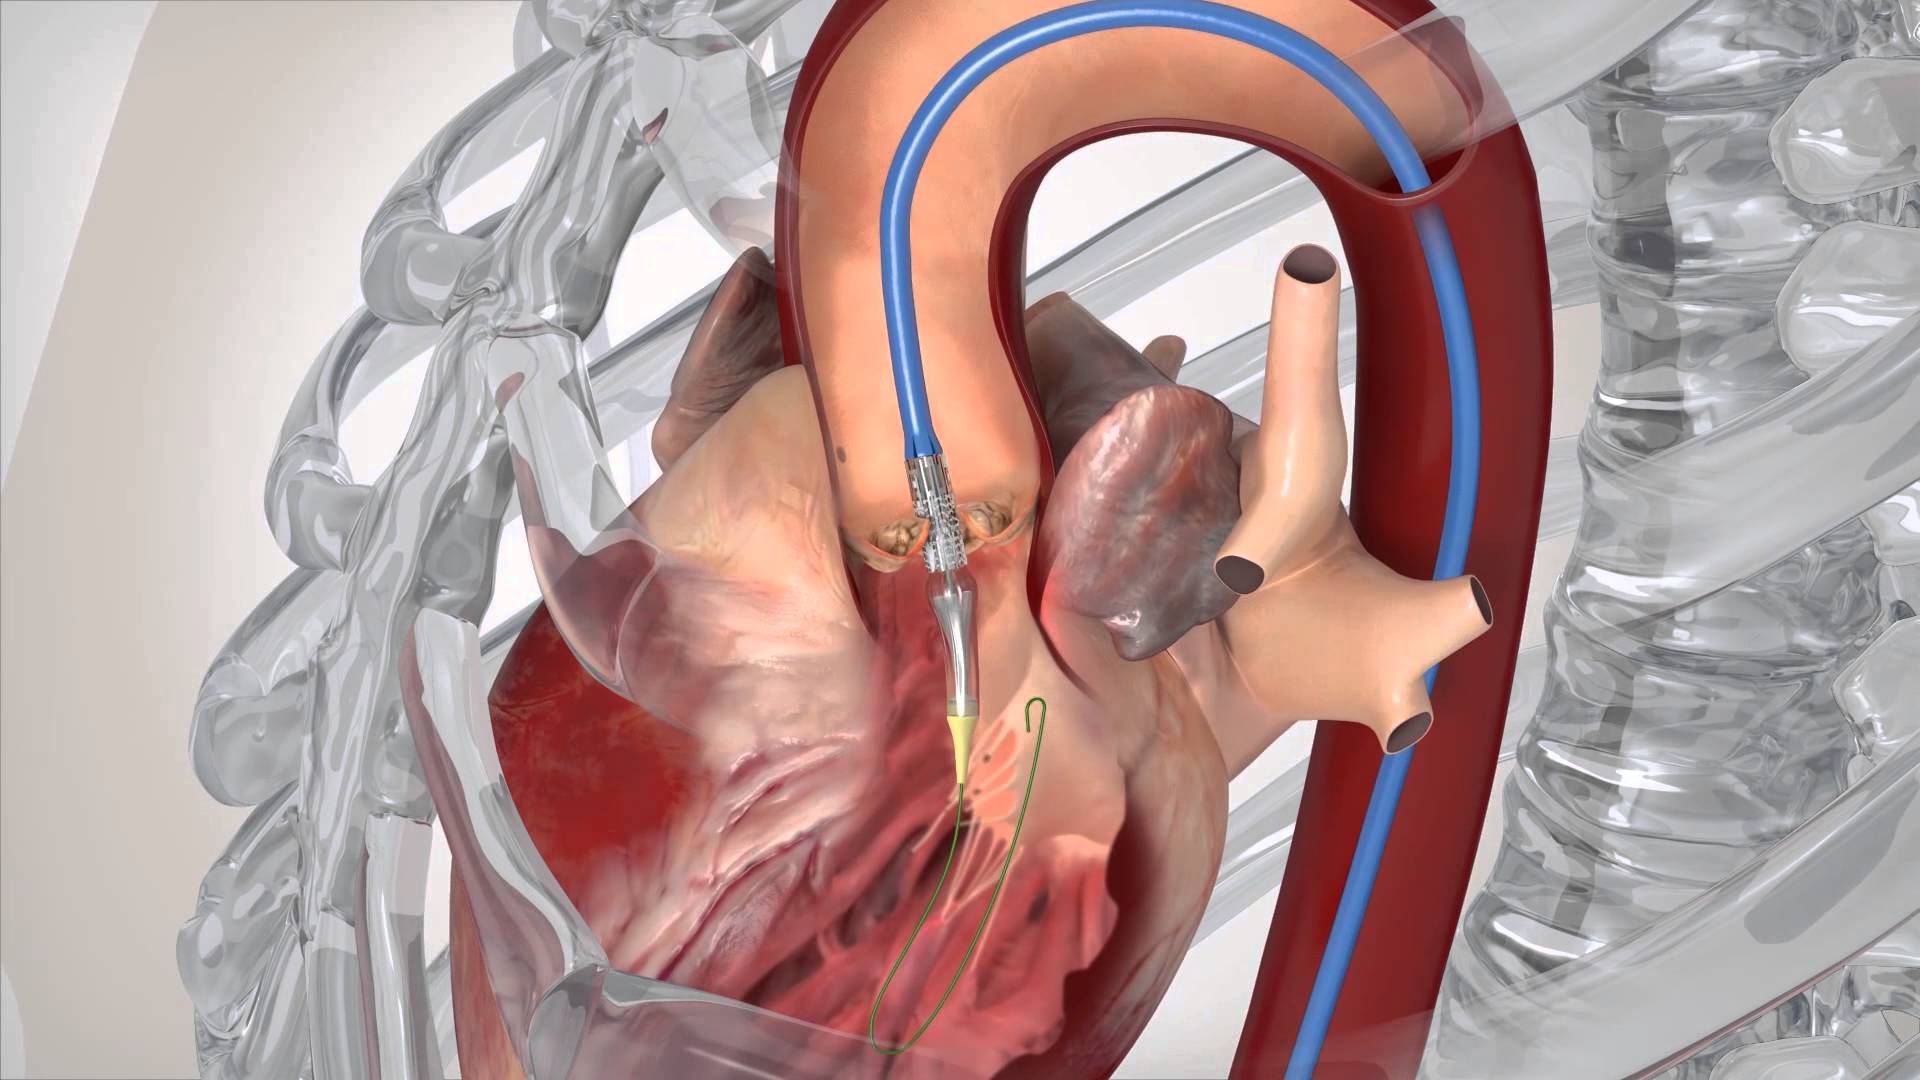 Narrowing Aortic Valve Can Be Treated Without Open Heart Surgery Upmc Healthbeat